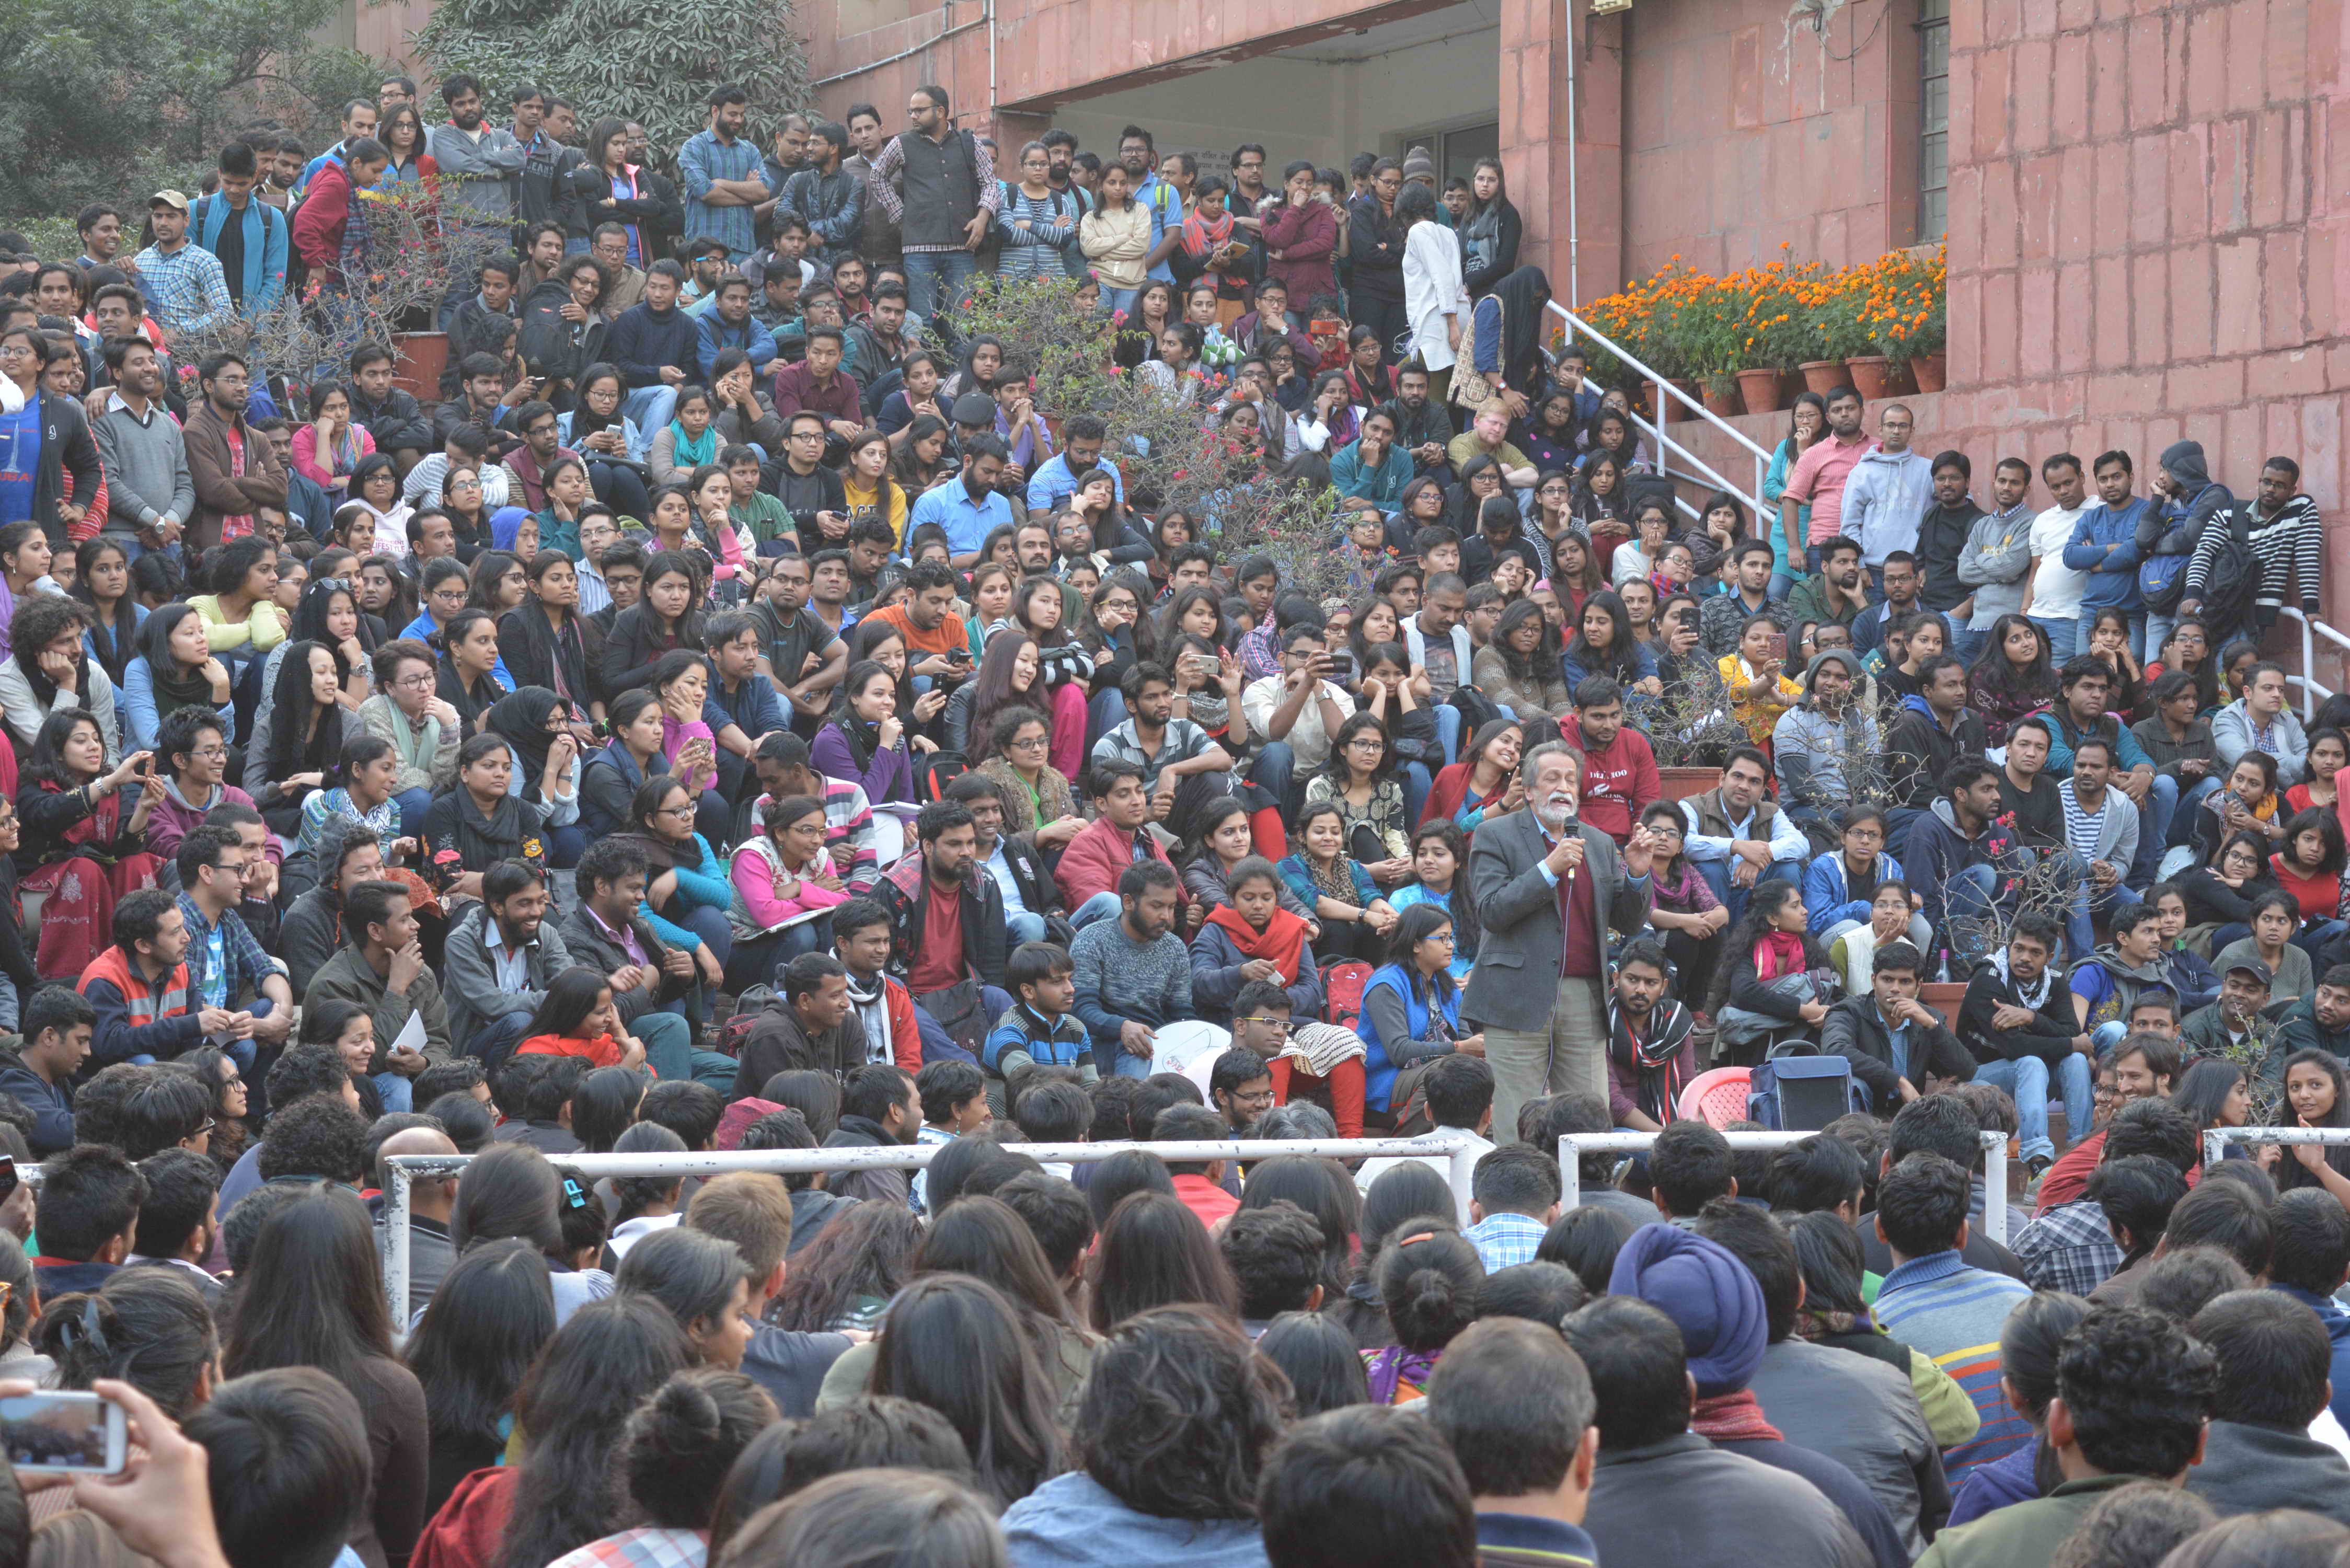 Prabhat Patnaik at Stand With JNU, 17 February 2016. Photo by Subin Dennis.